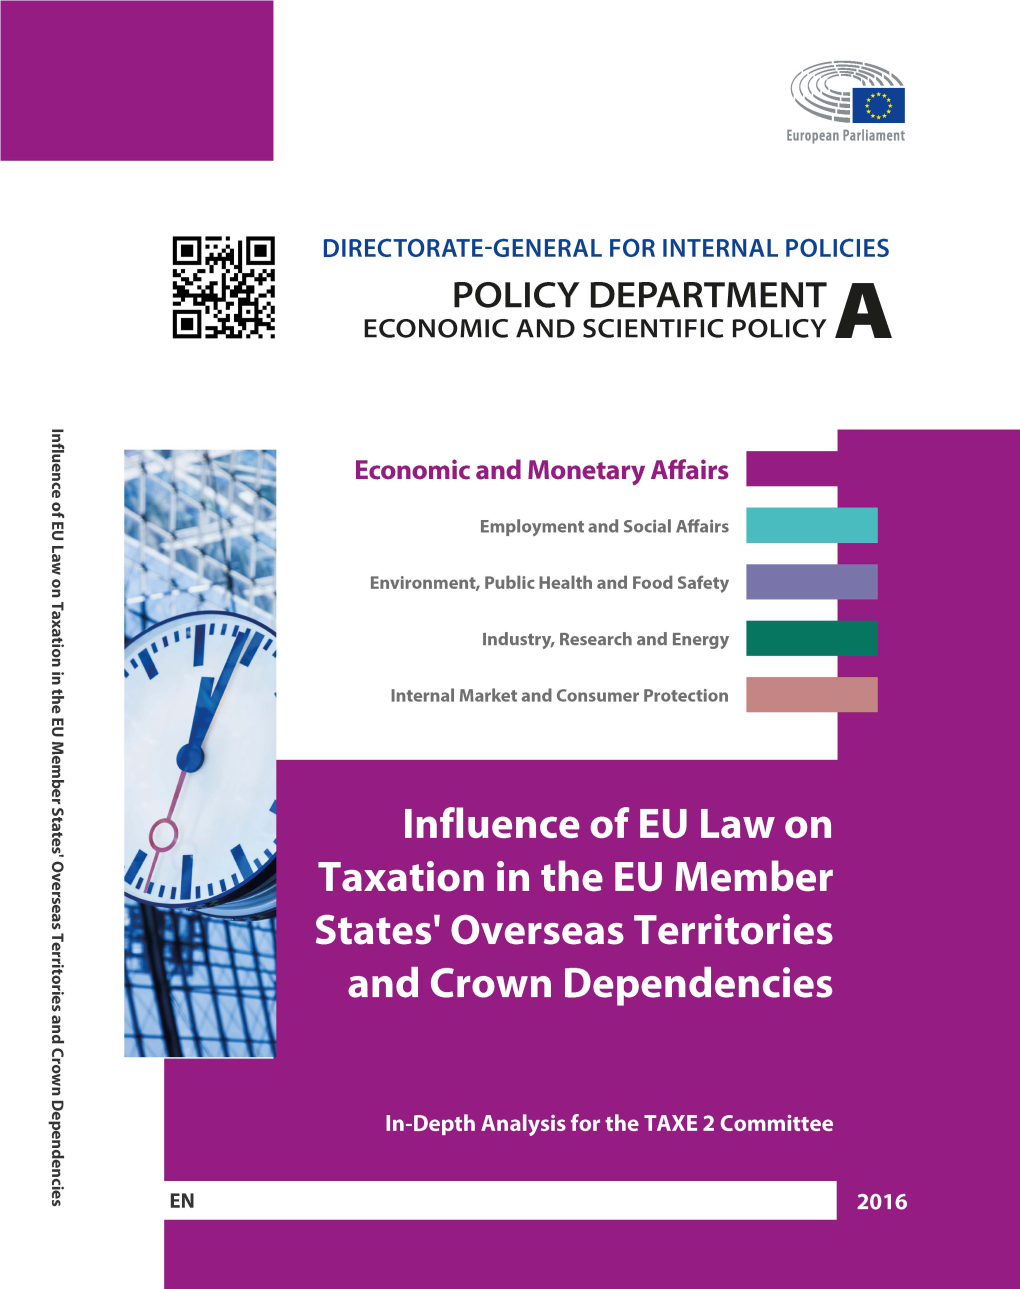 Influence of EU Law on Taxation in the EU Member States' Overseas Territories and Crown Dependencies